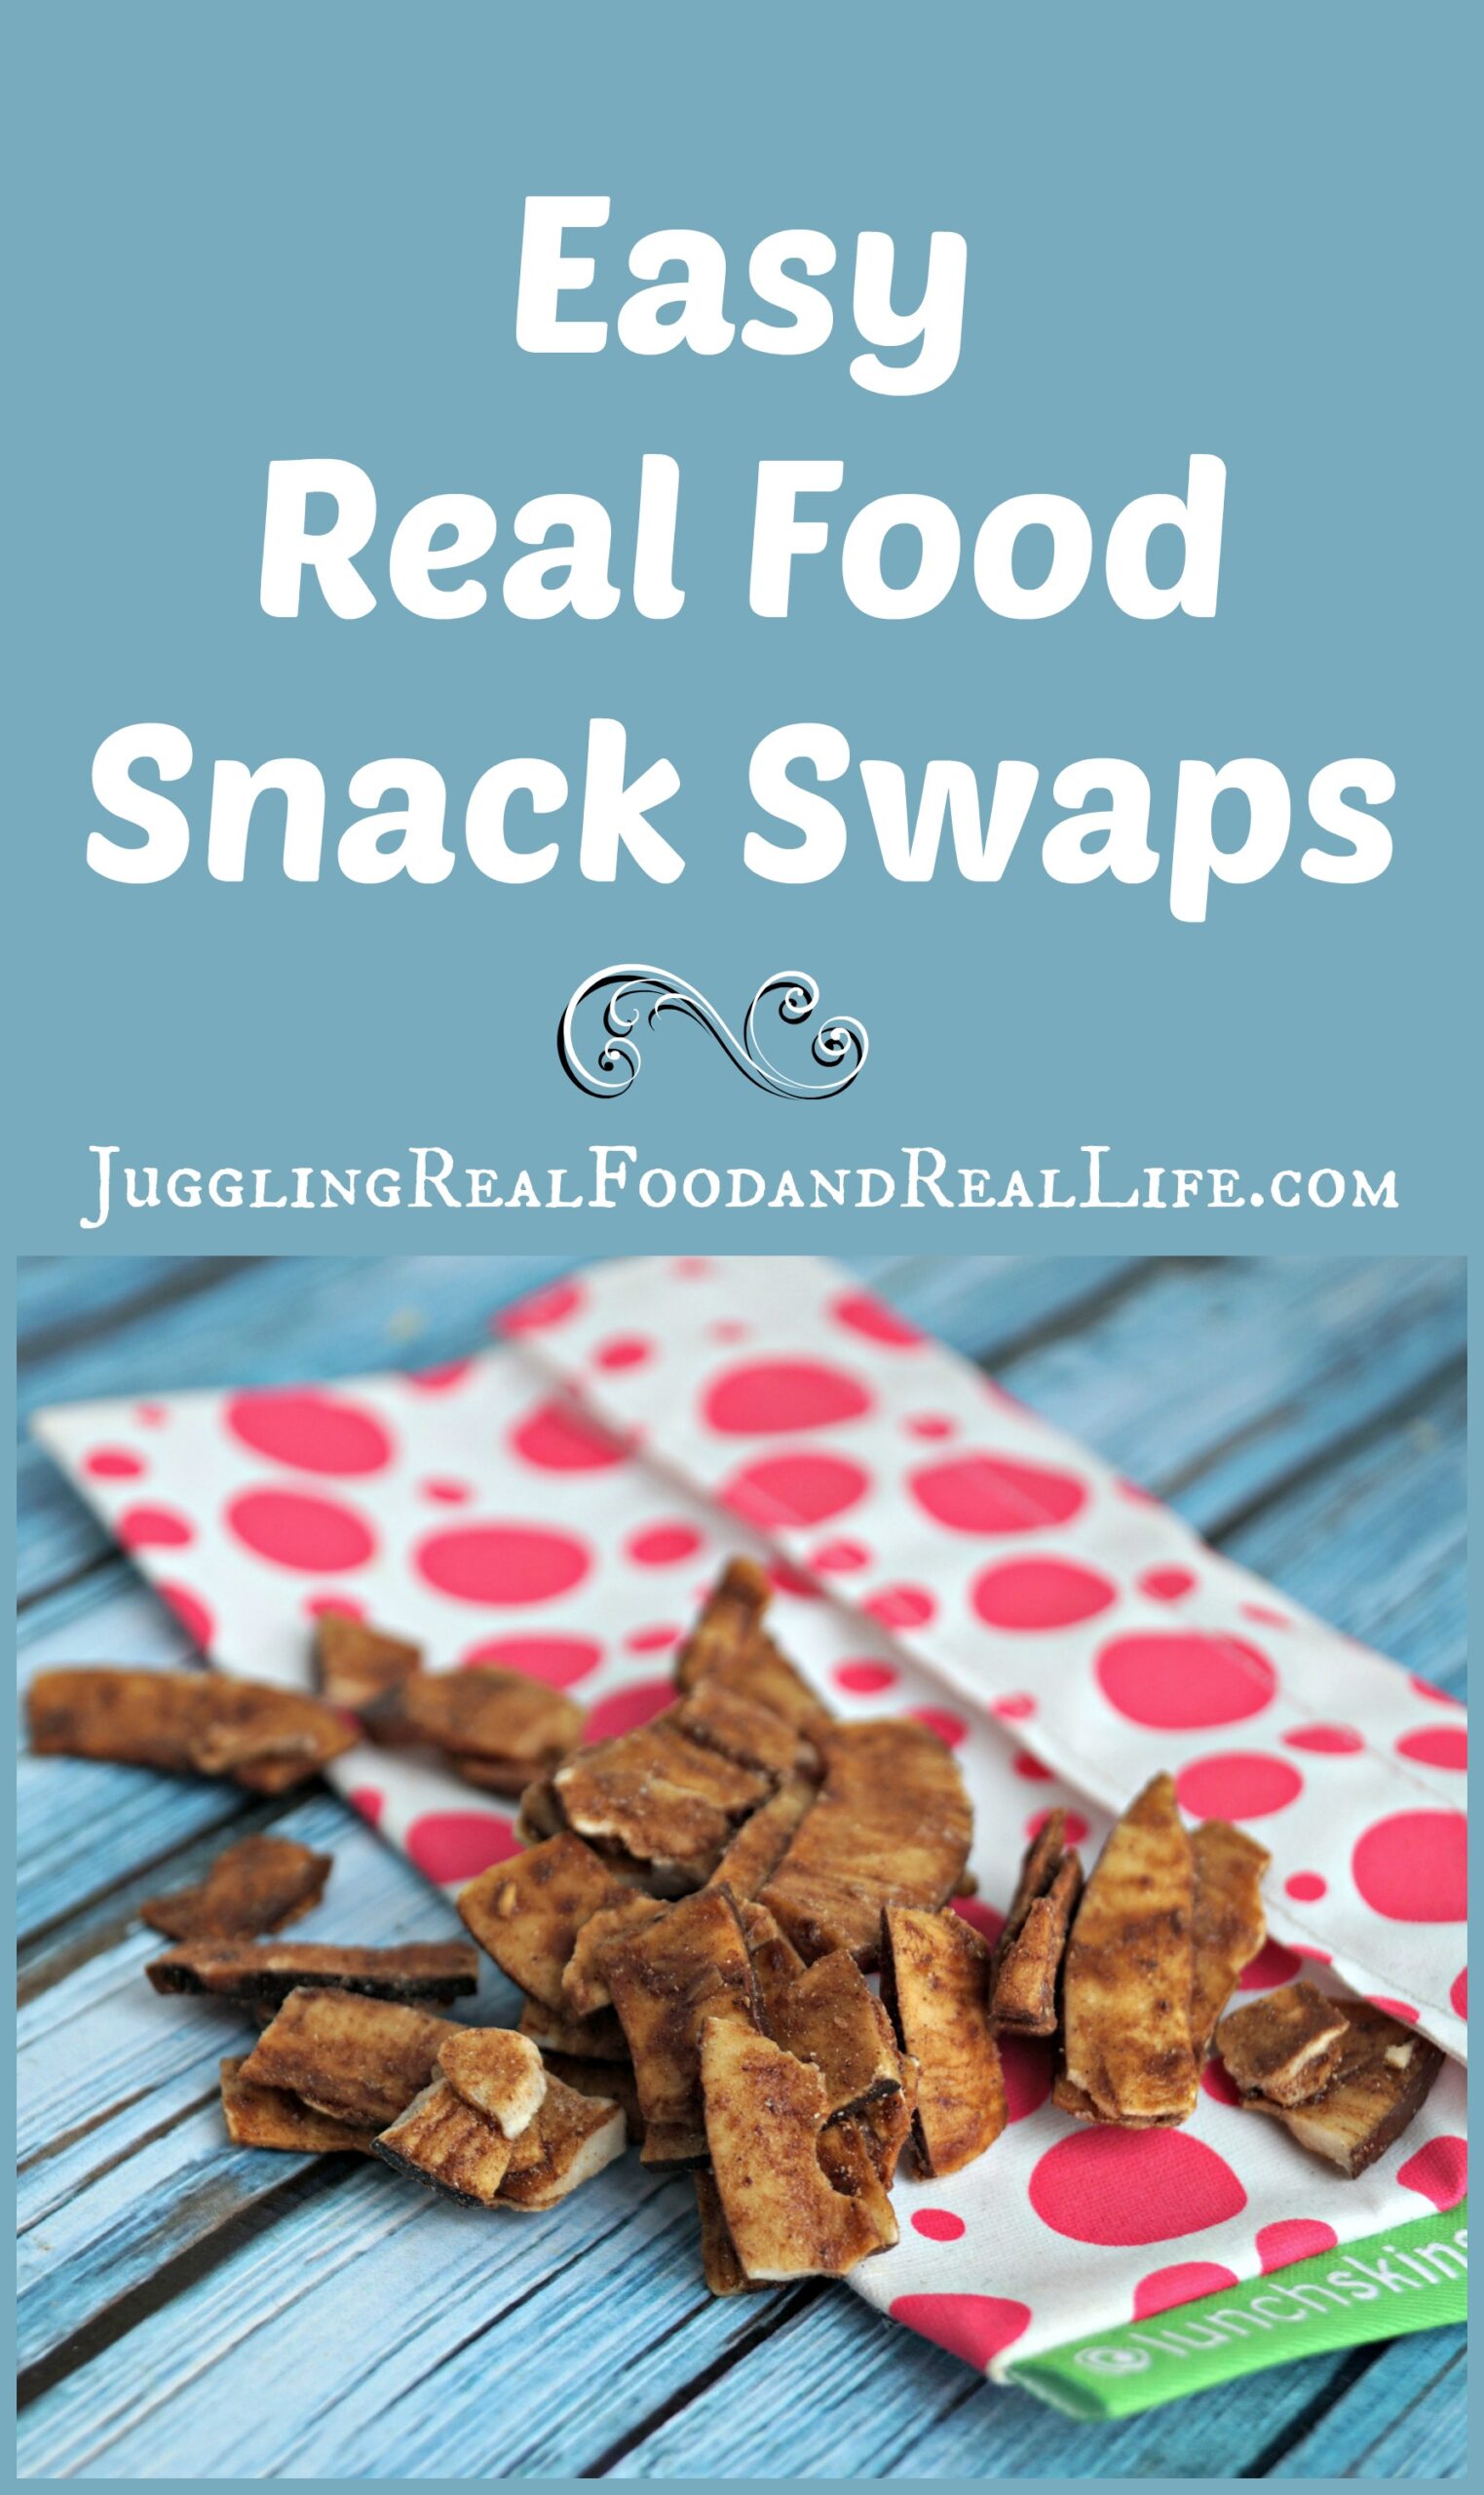 Easy Real Food Snack Swaps